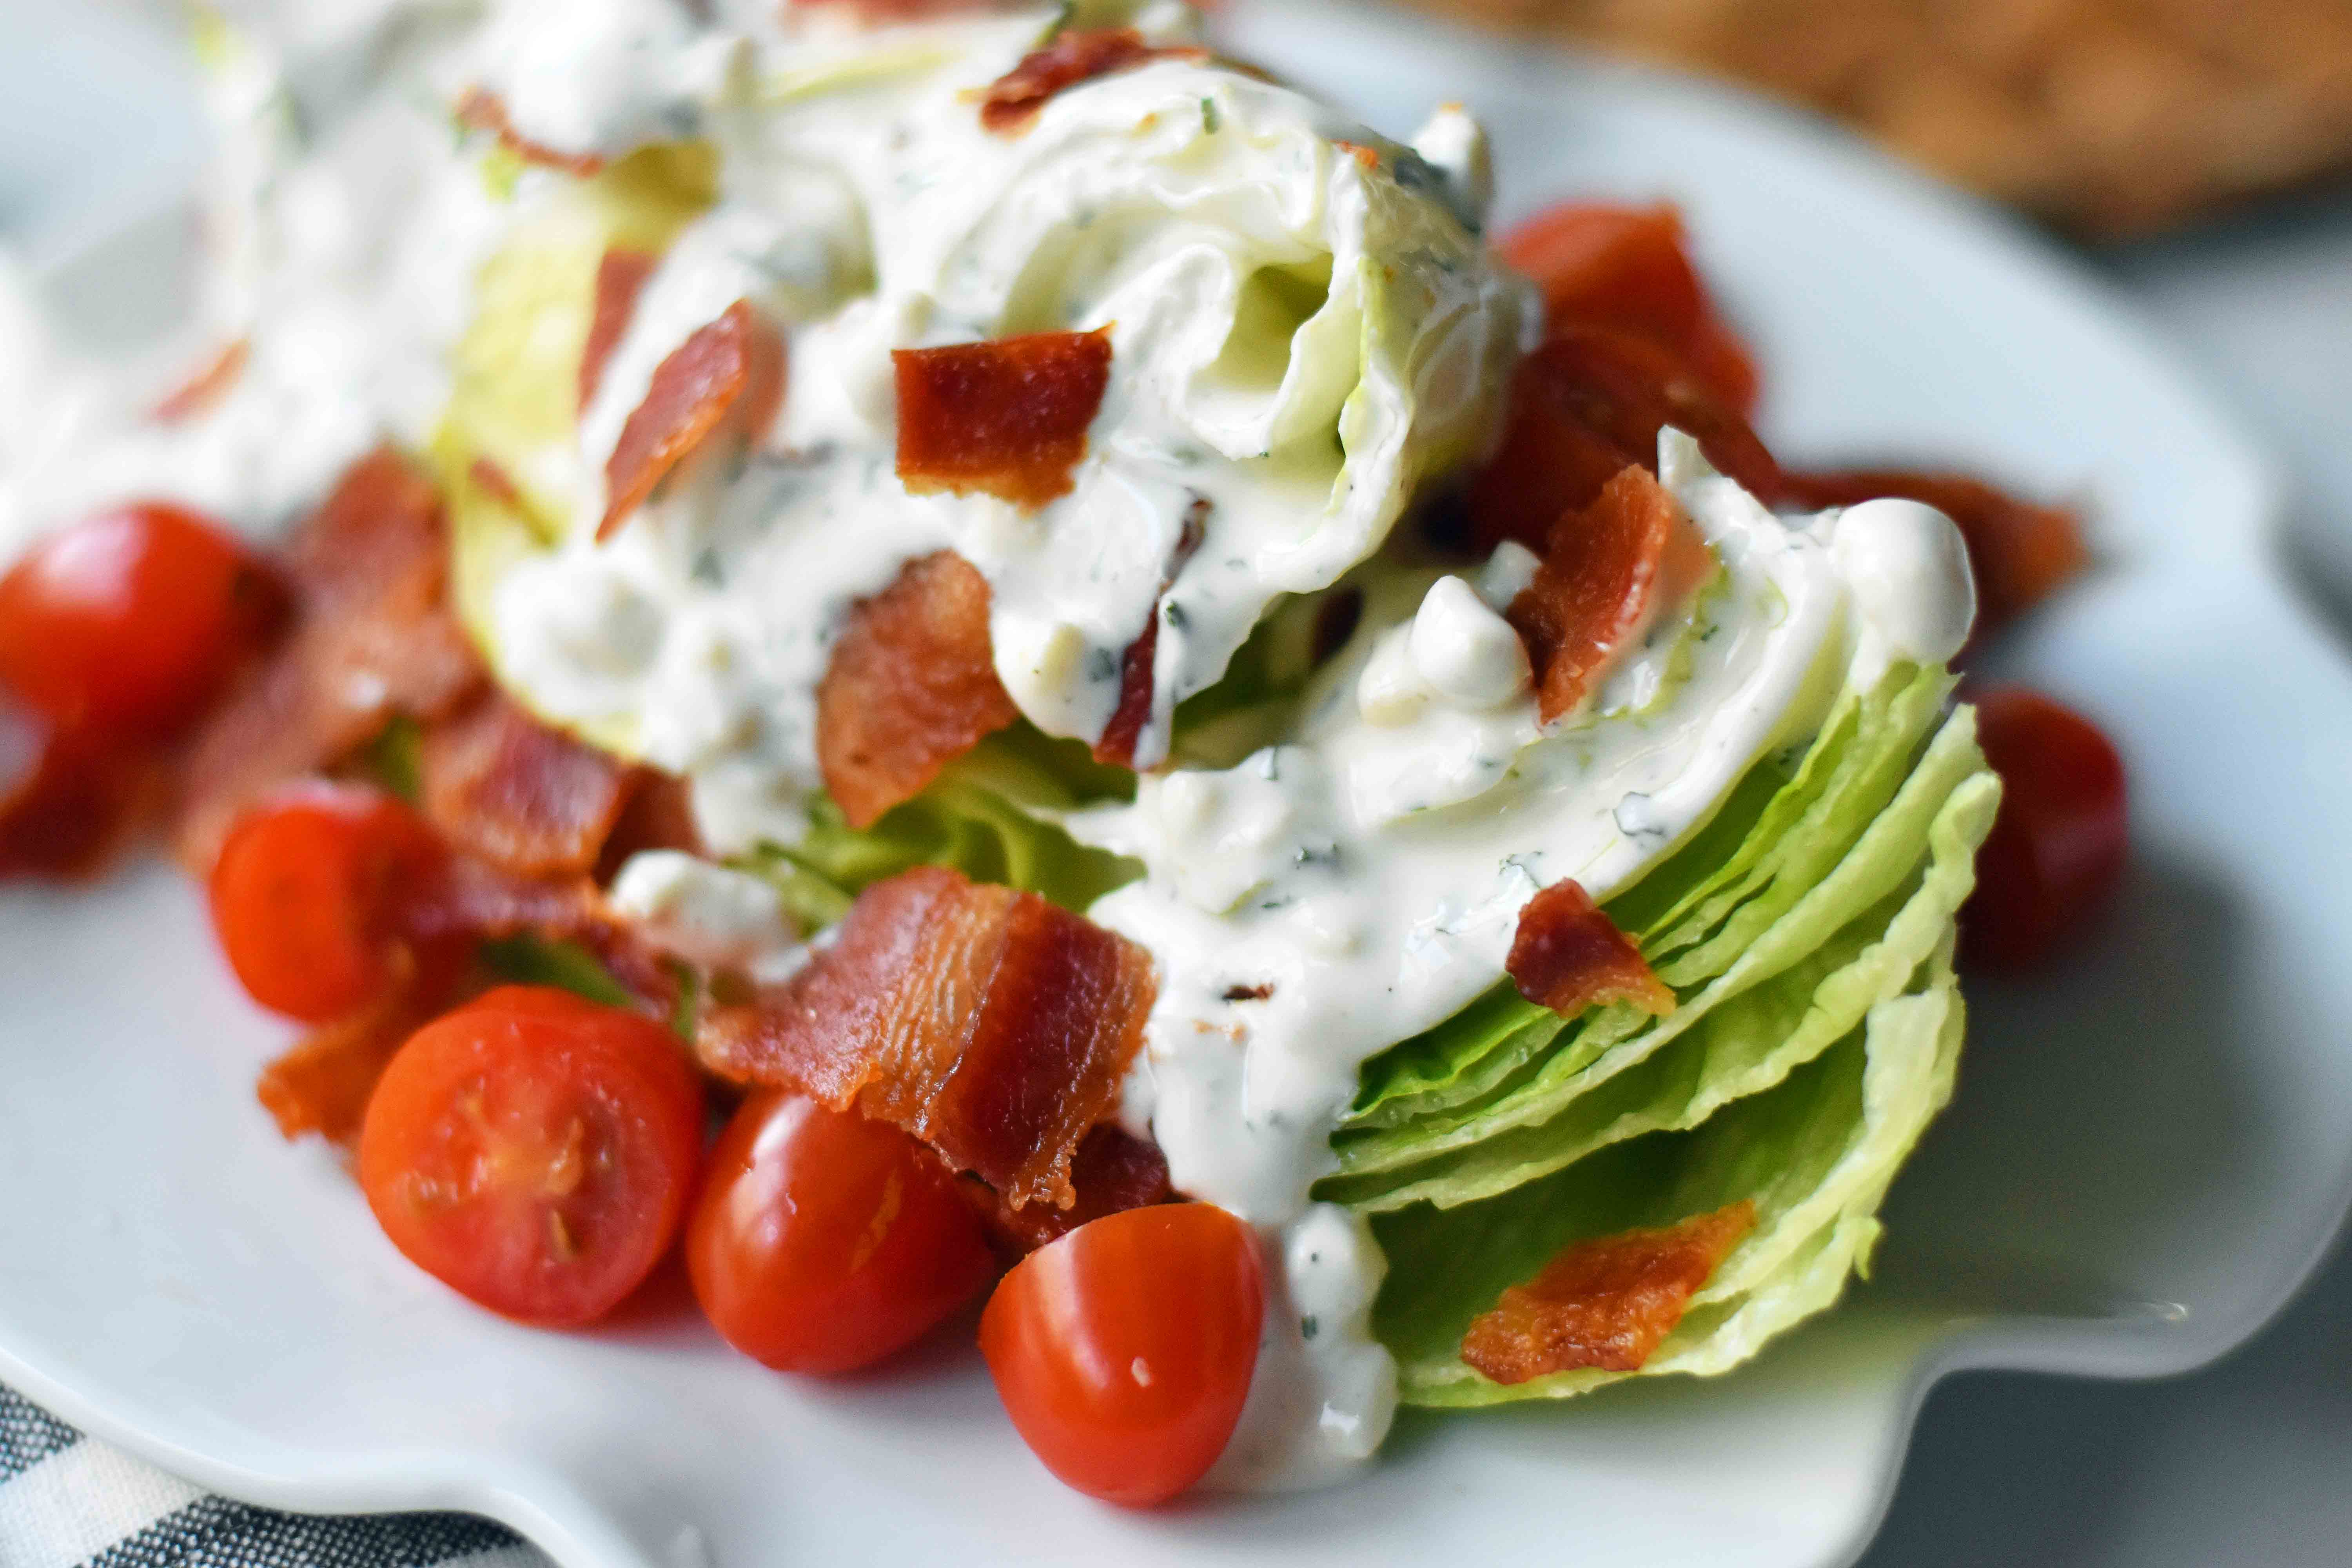 Ultimate Wedge Salad made with crisp iceberg lettuce, fresh cherry tomatoes, crispy bacon, with a homemade creamy ranch or blue cheese dressing. A classic, crowd-favorite salad. www.modernhoney.com